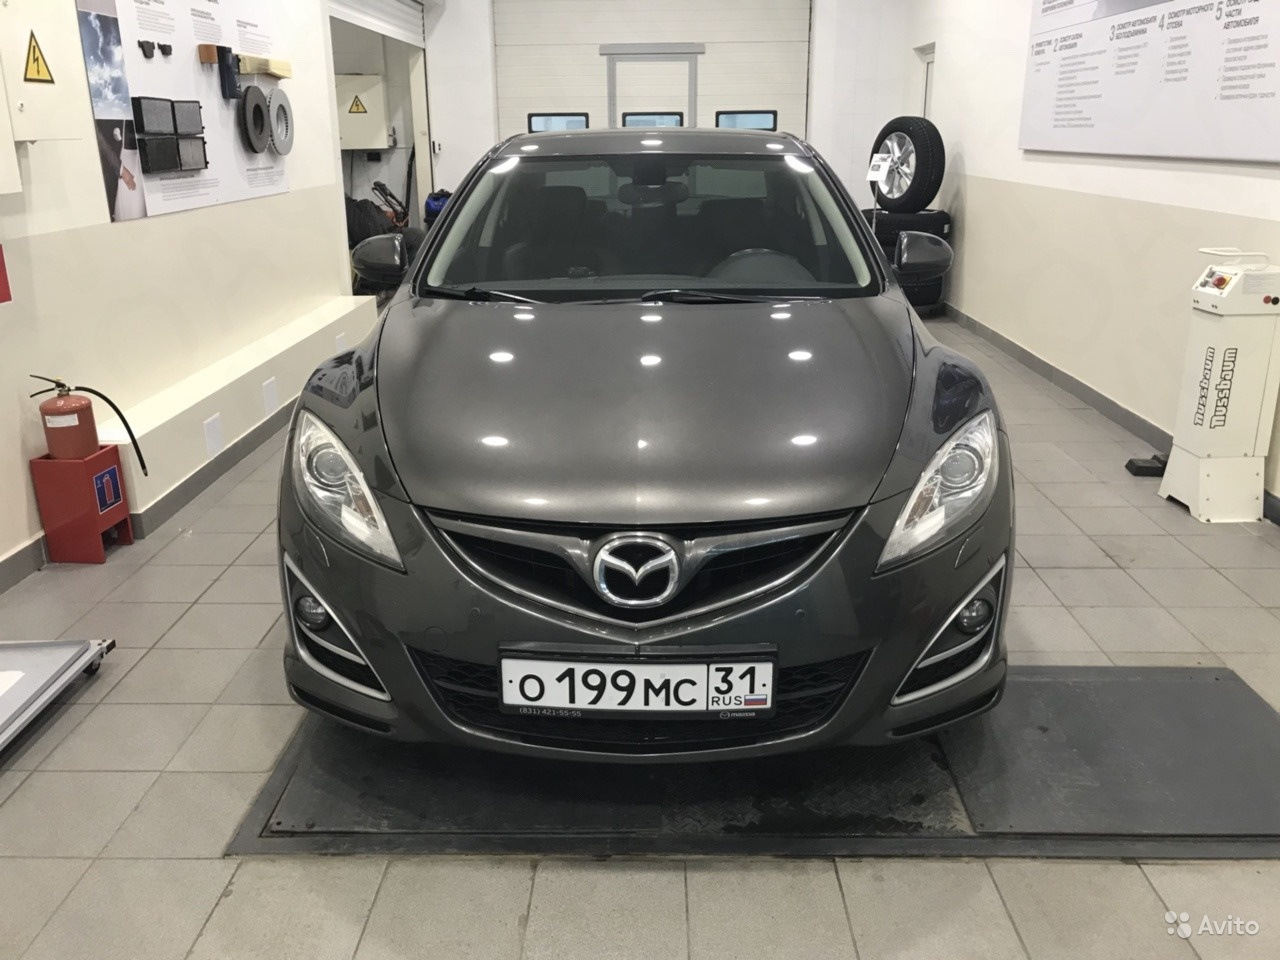 Mazda бу. Мазда other. Мазда Елнос 500. Мазда елунос 800. Mazda 28w.